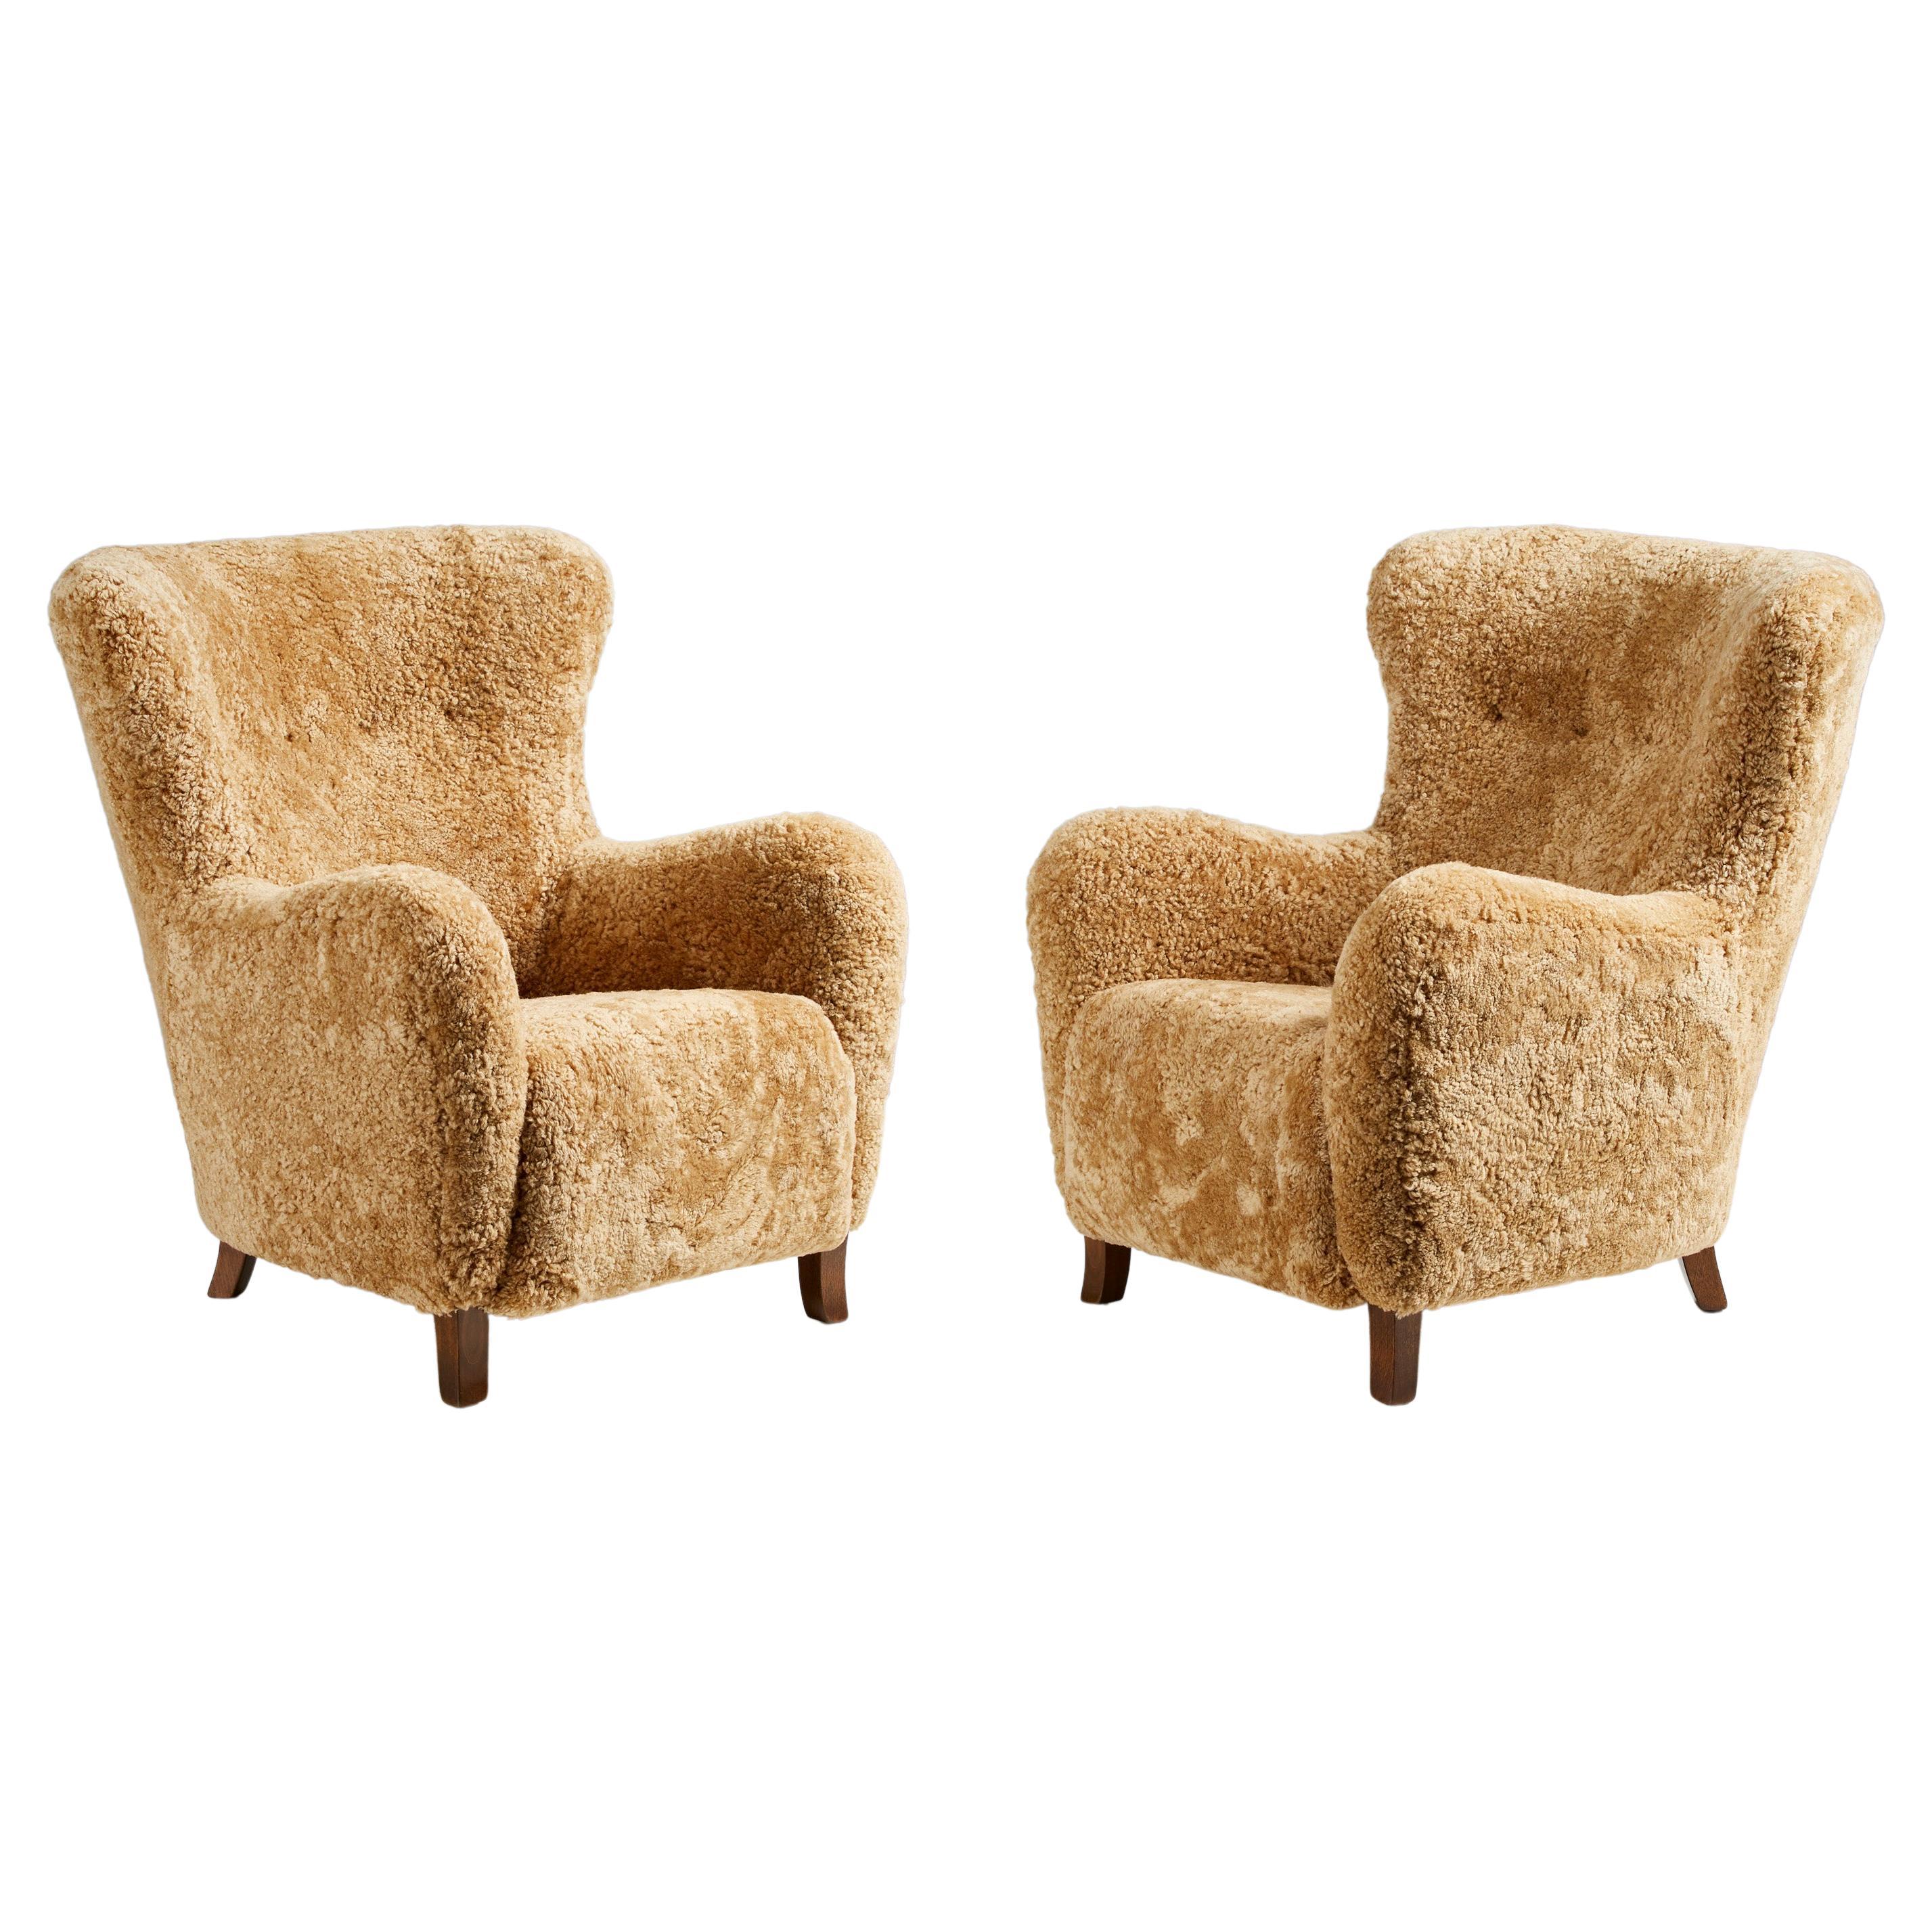 Pair of Custom Made Sheepskin Wing Chairs For Sale